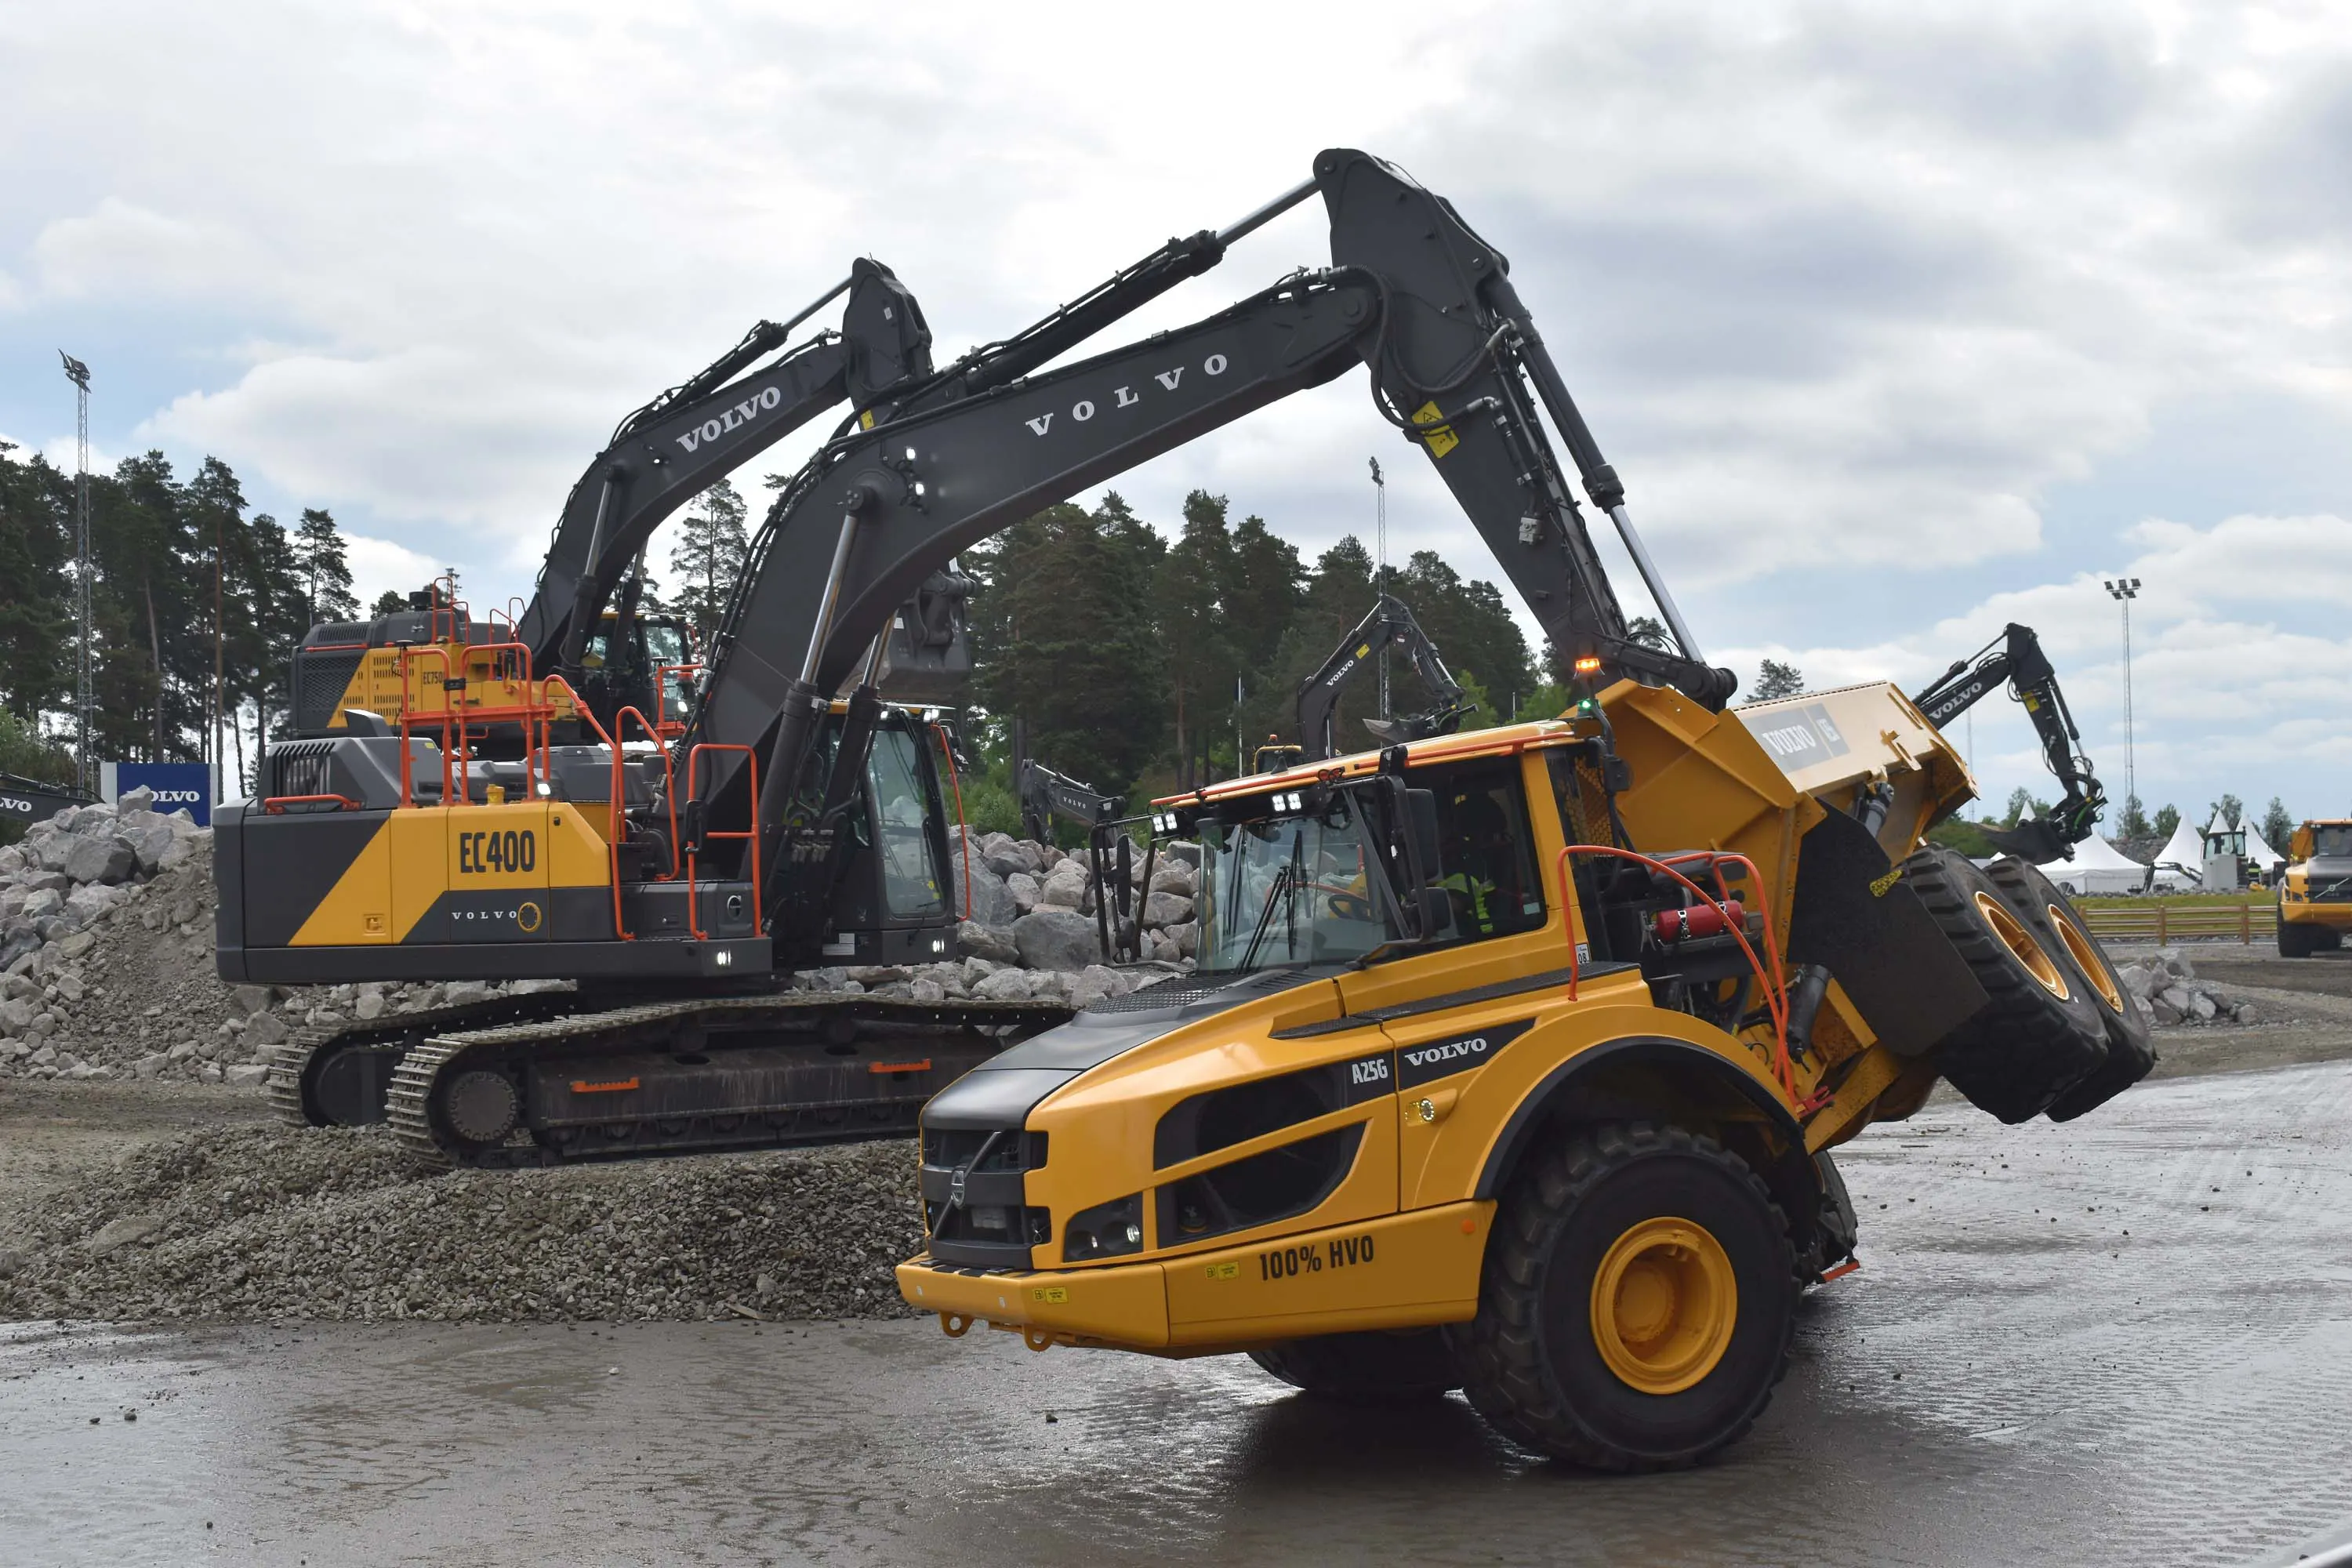 A Volvo CE articulated hauler riding on its side wheels with help from an excavator.